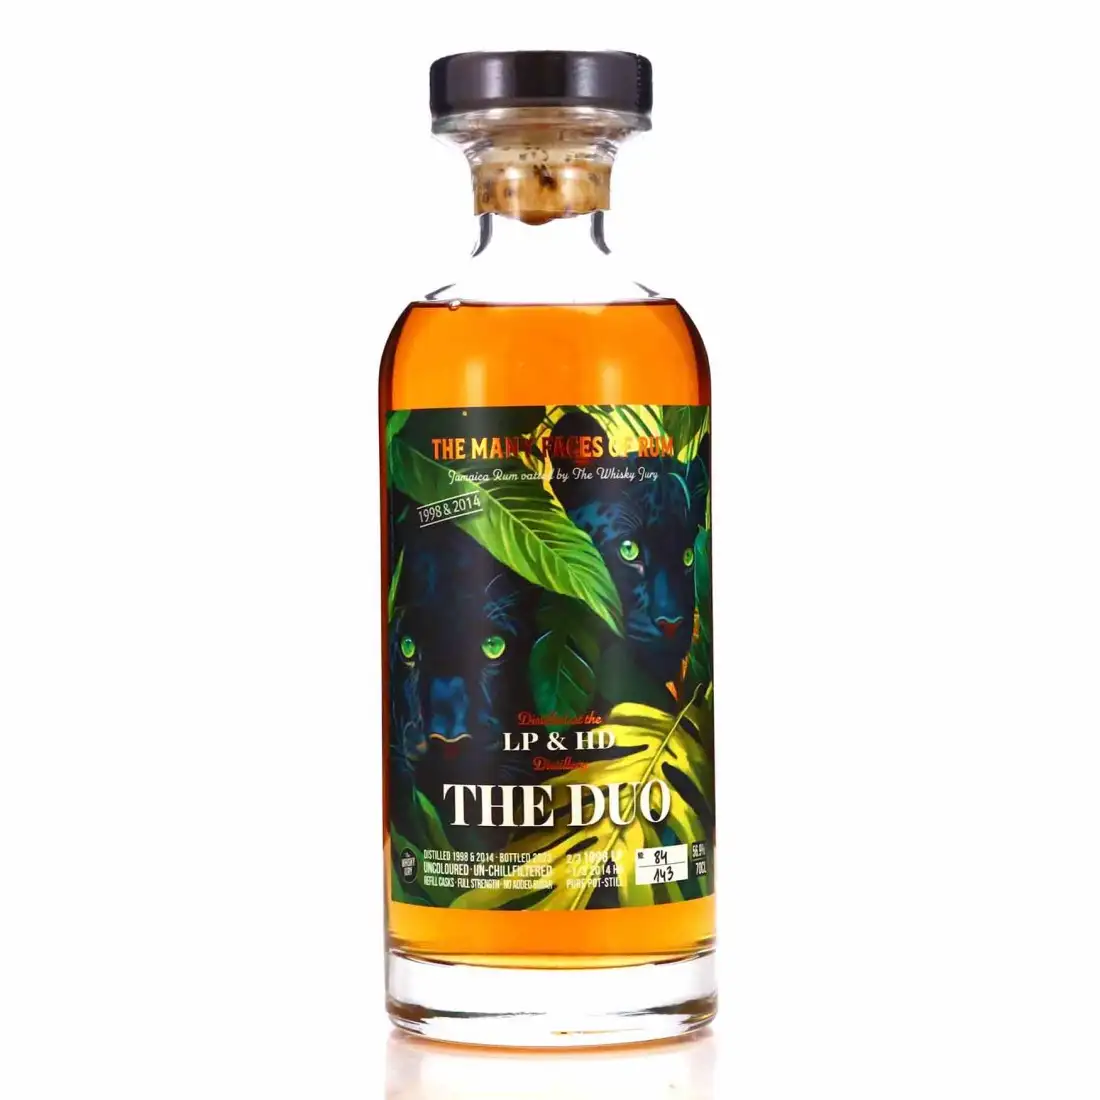 Image of the front of the bottle of the rum The Duo - Jamaica Rum